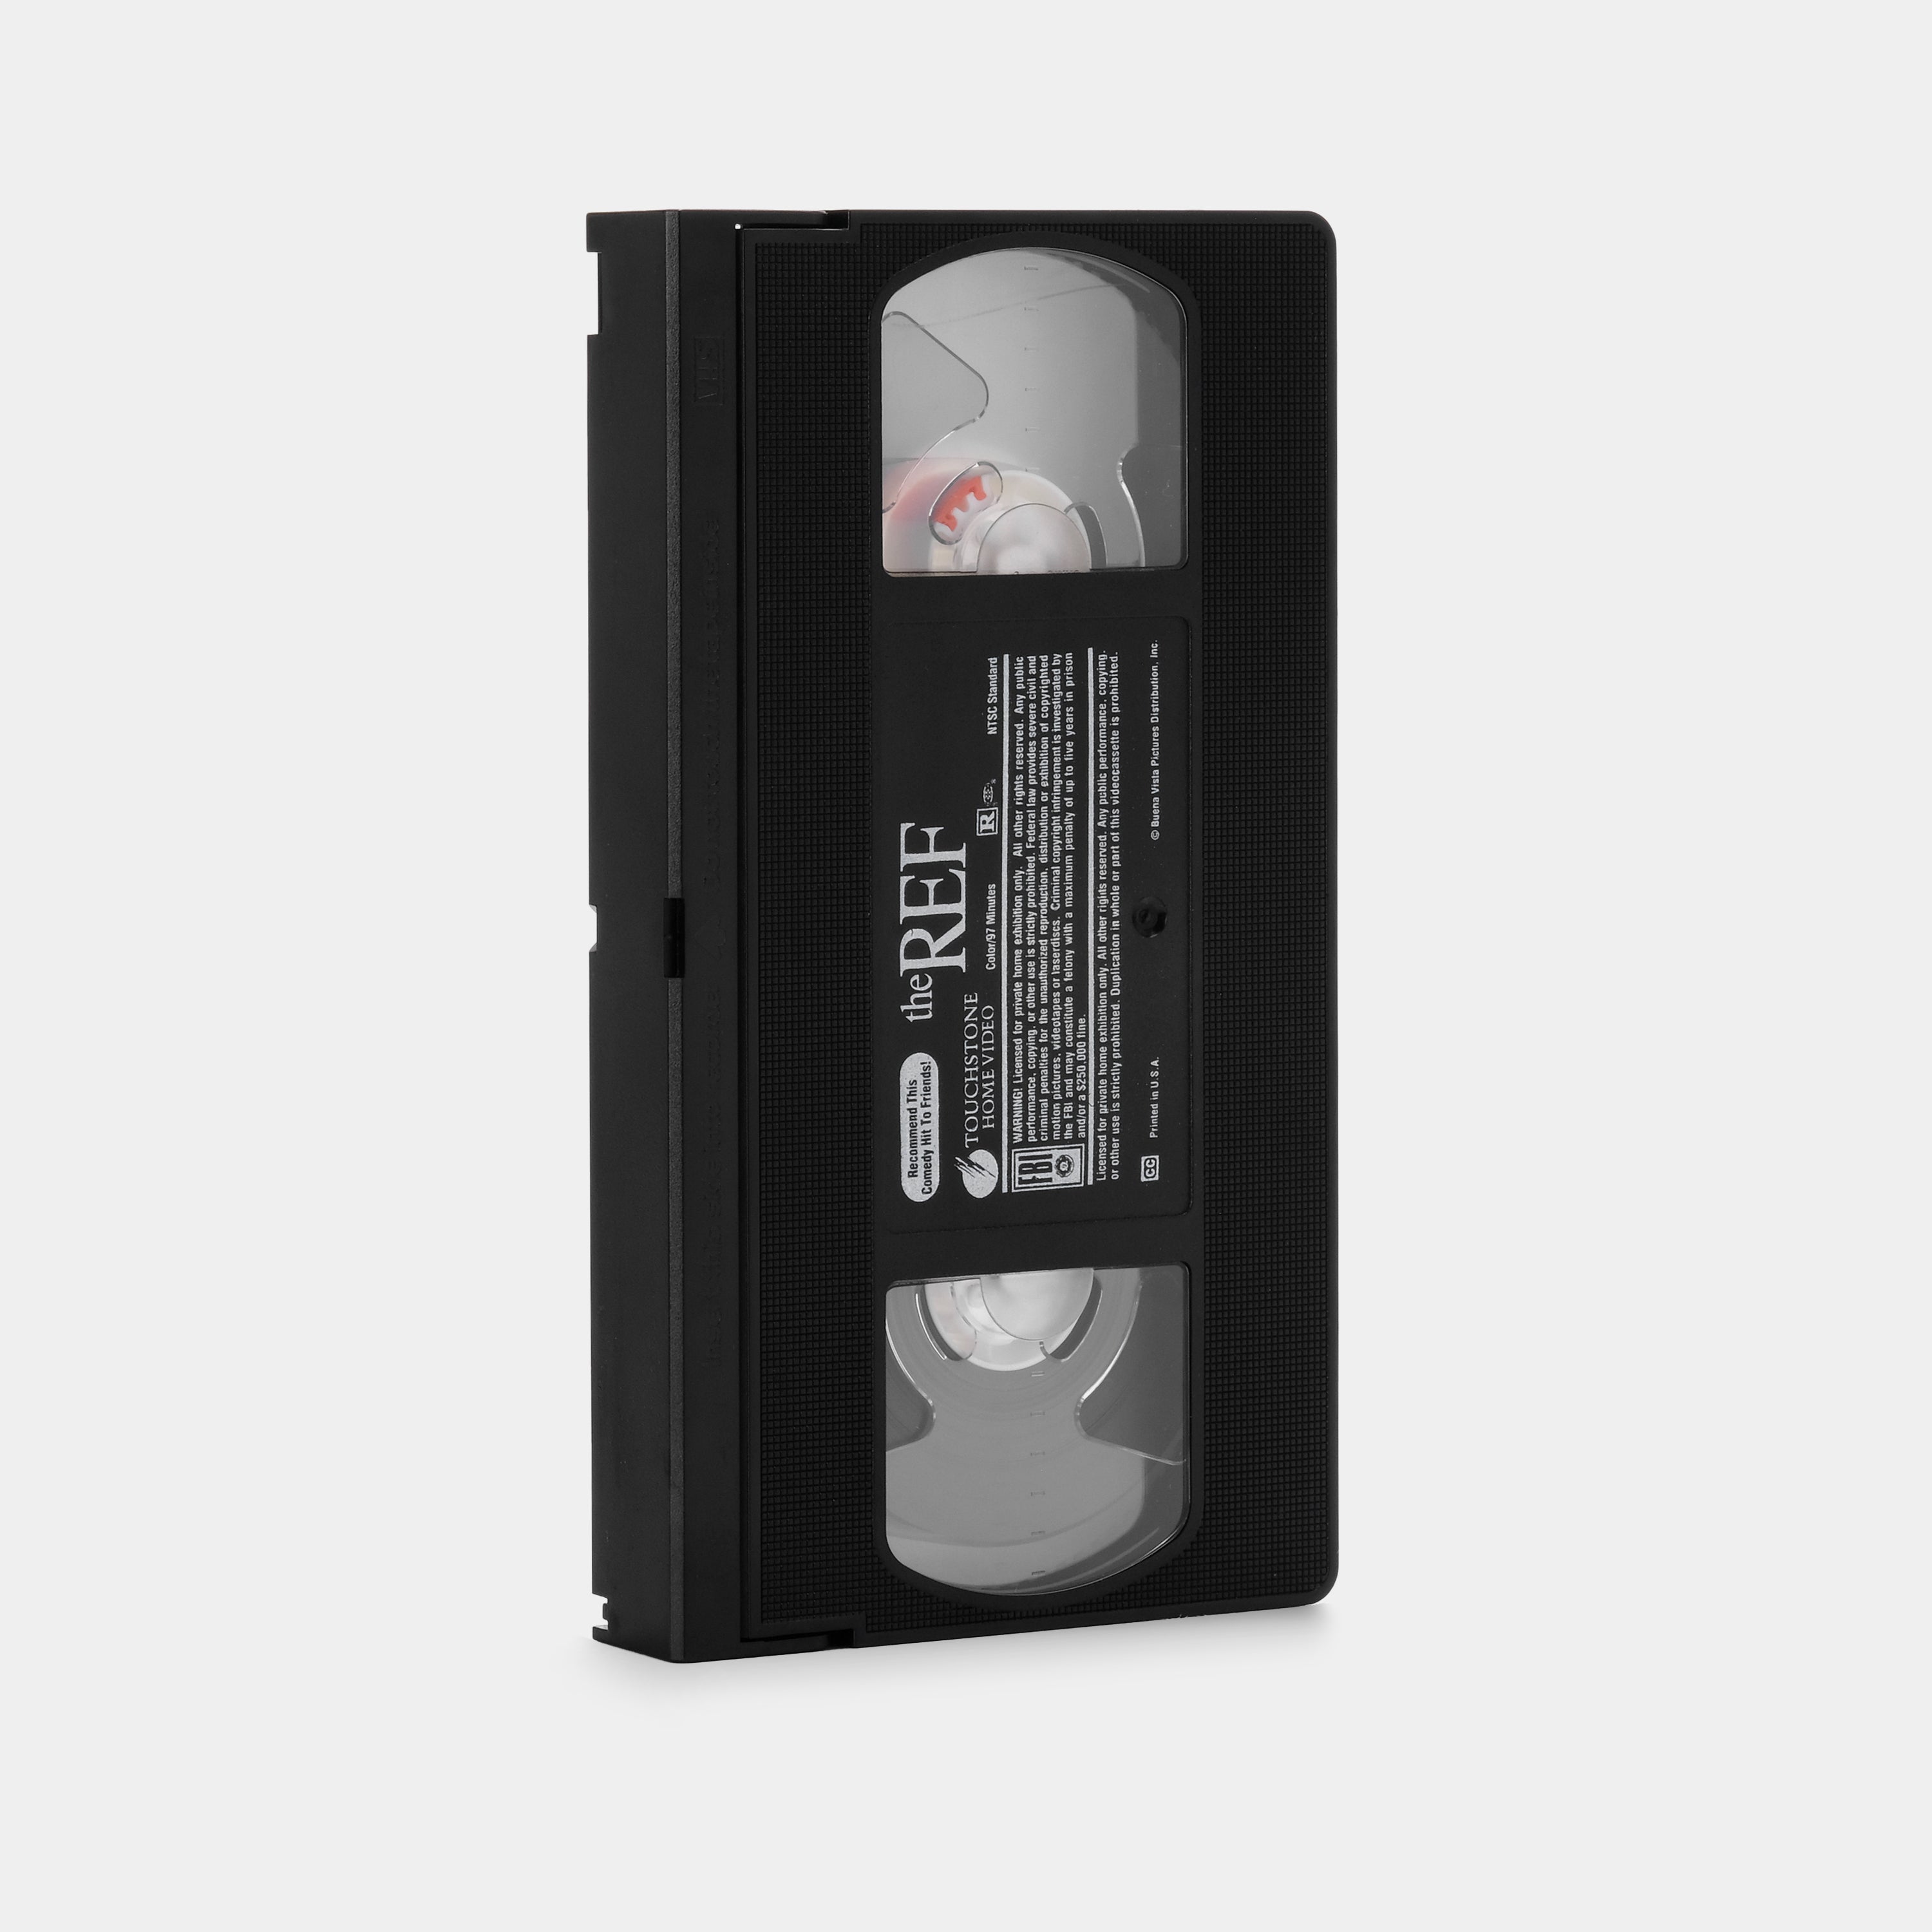 The Ref VHS Tape